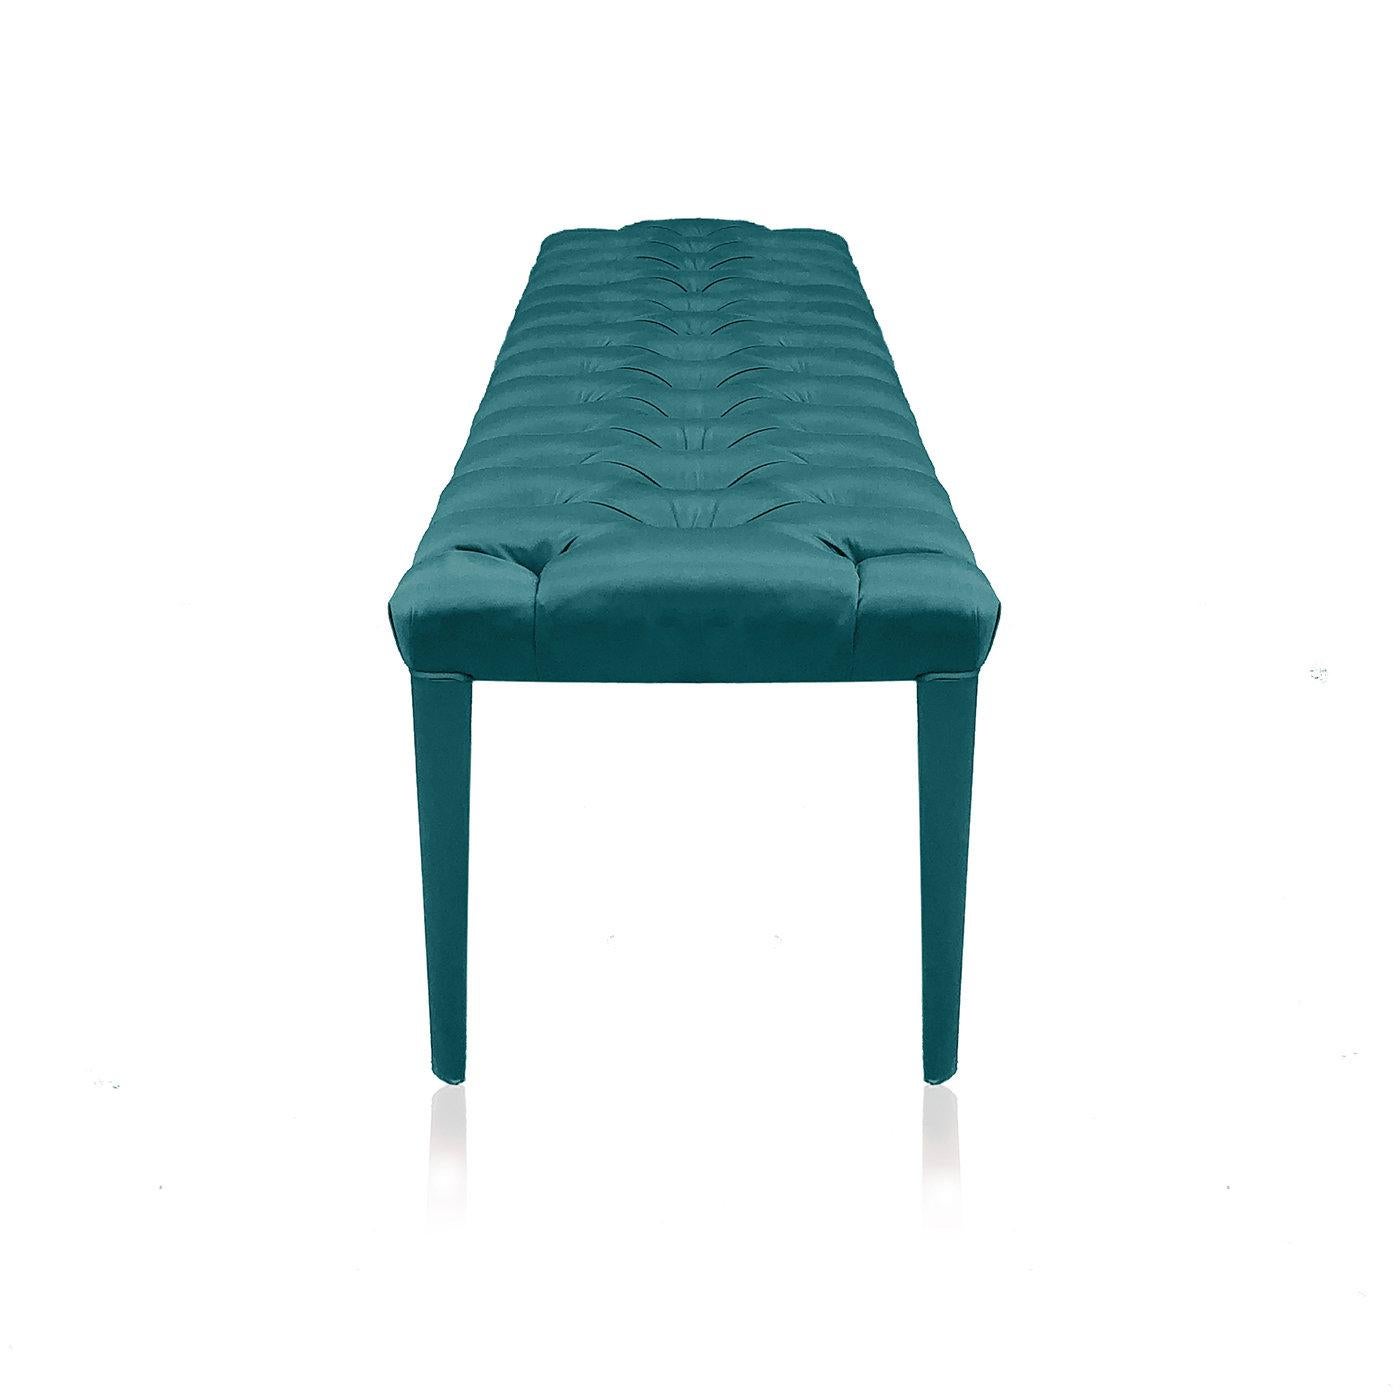 Farfalla Bio Ottoman Bench Petrol by Davide Barzaghi In New Condition For Sale In Milan, IT